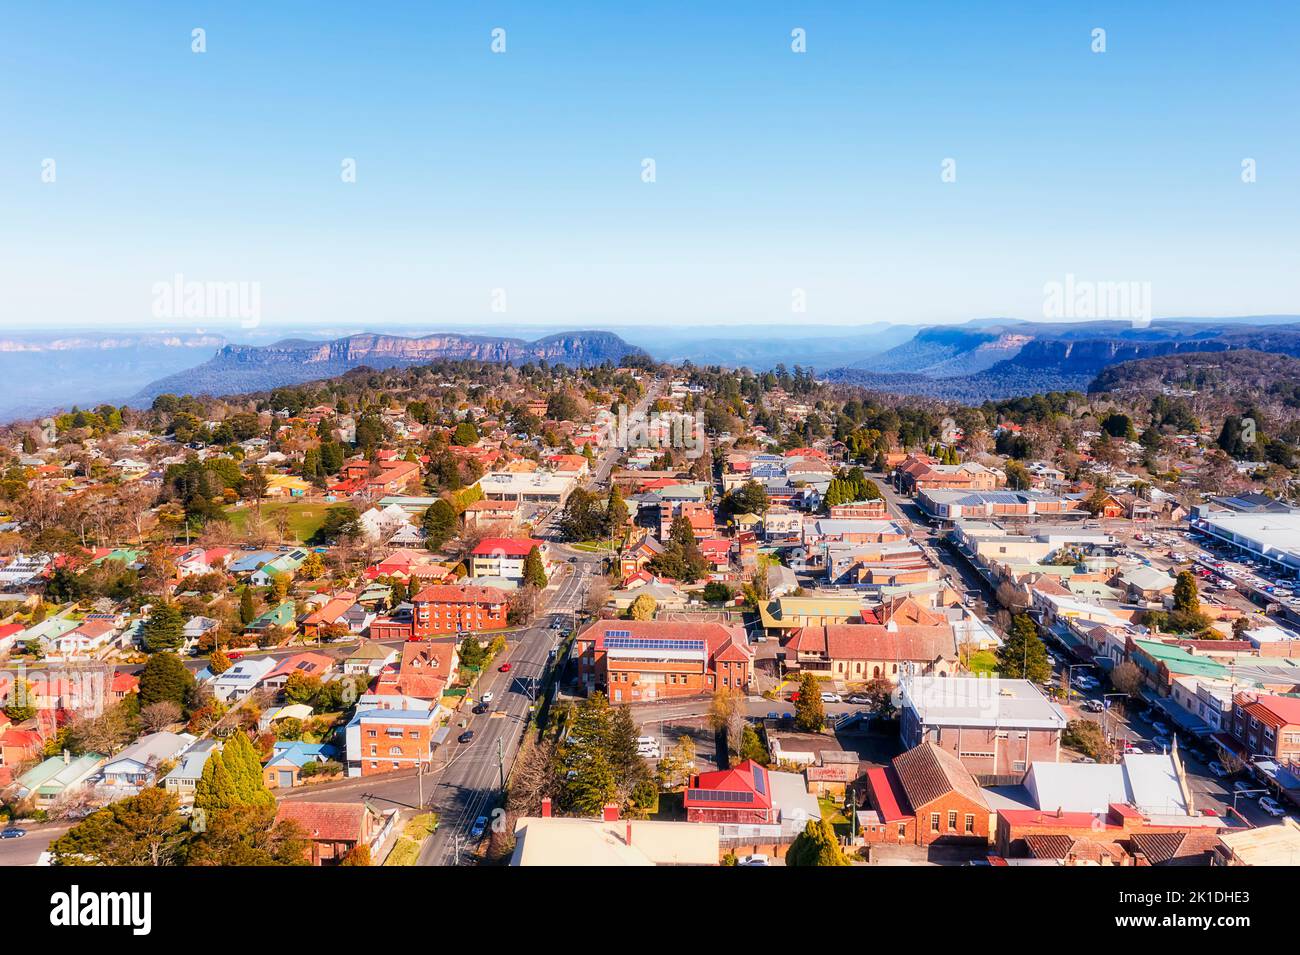 Downtown of Katoomba town in Blue Mountains of Australia - famous Three Sisters rock formation. Stock Photo